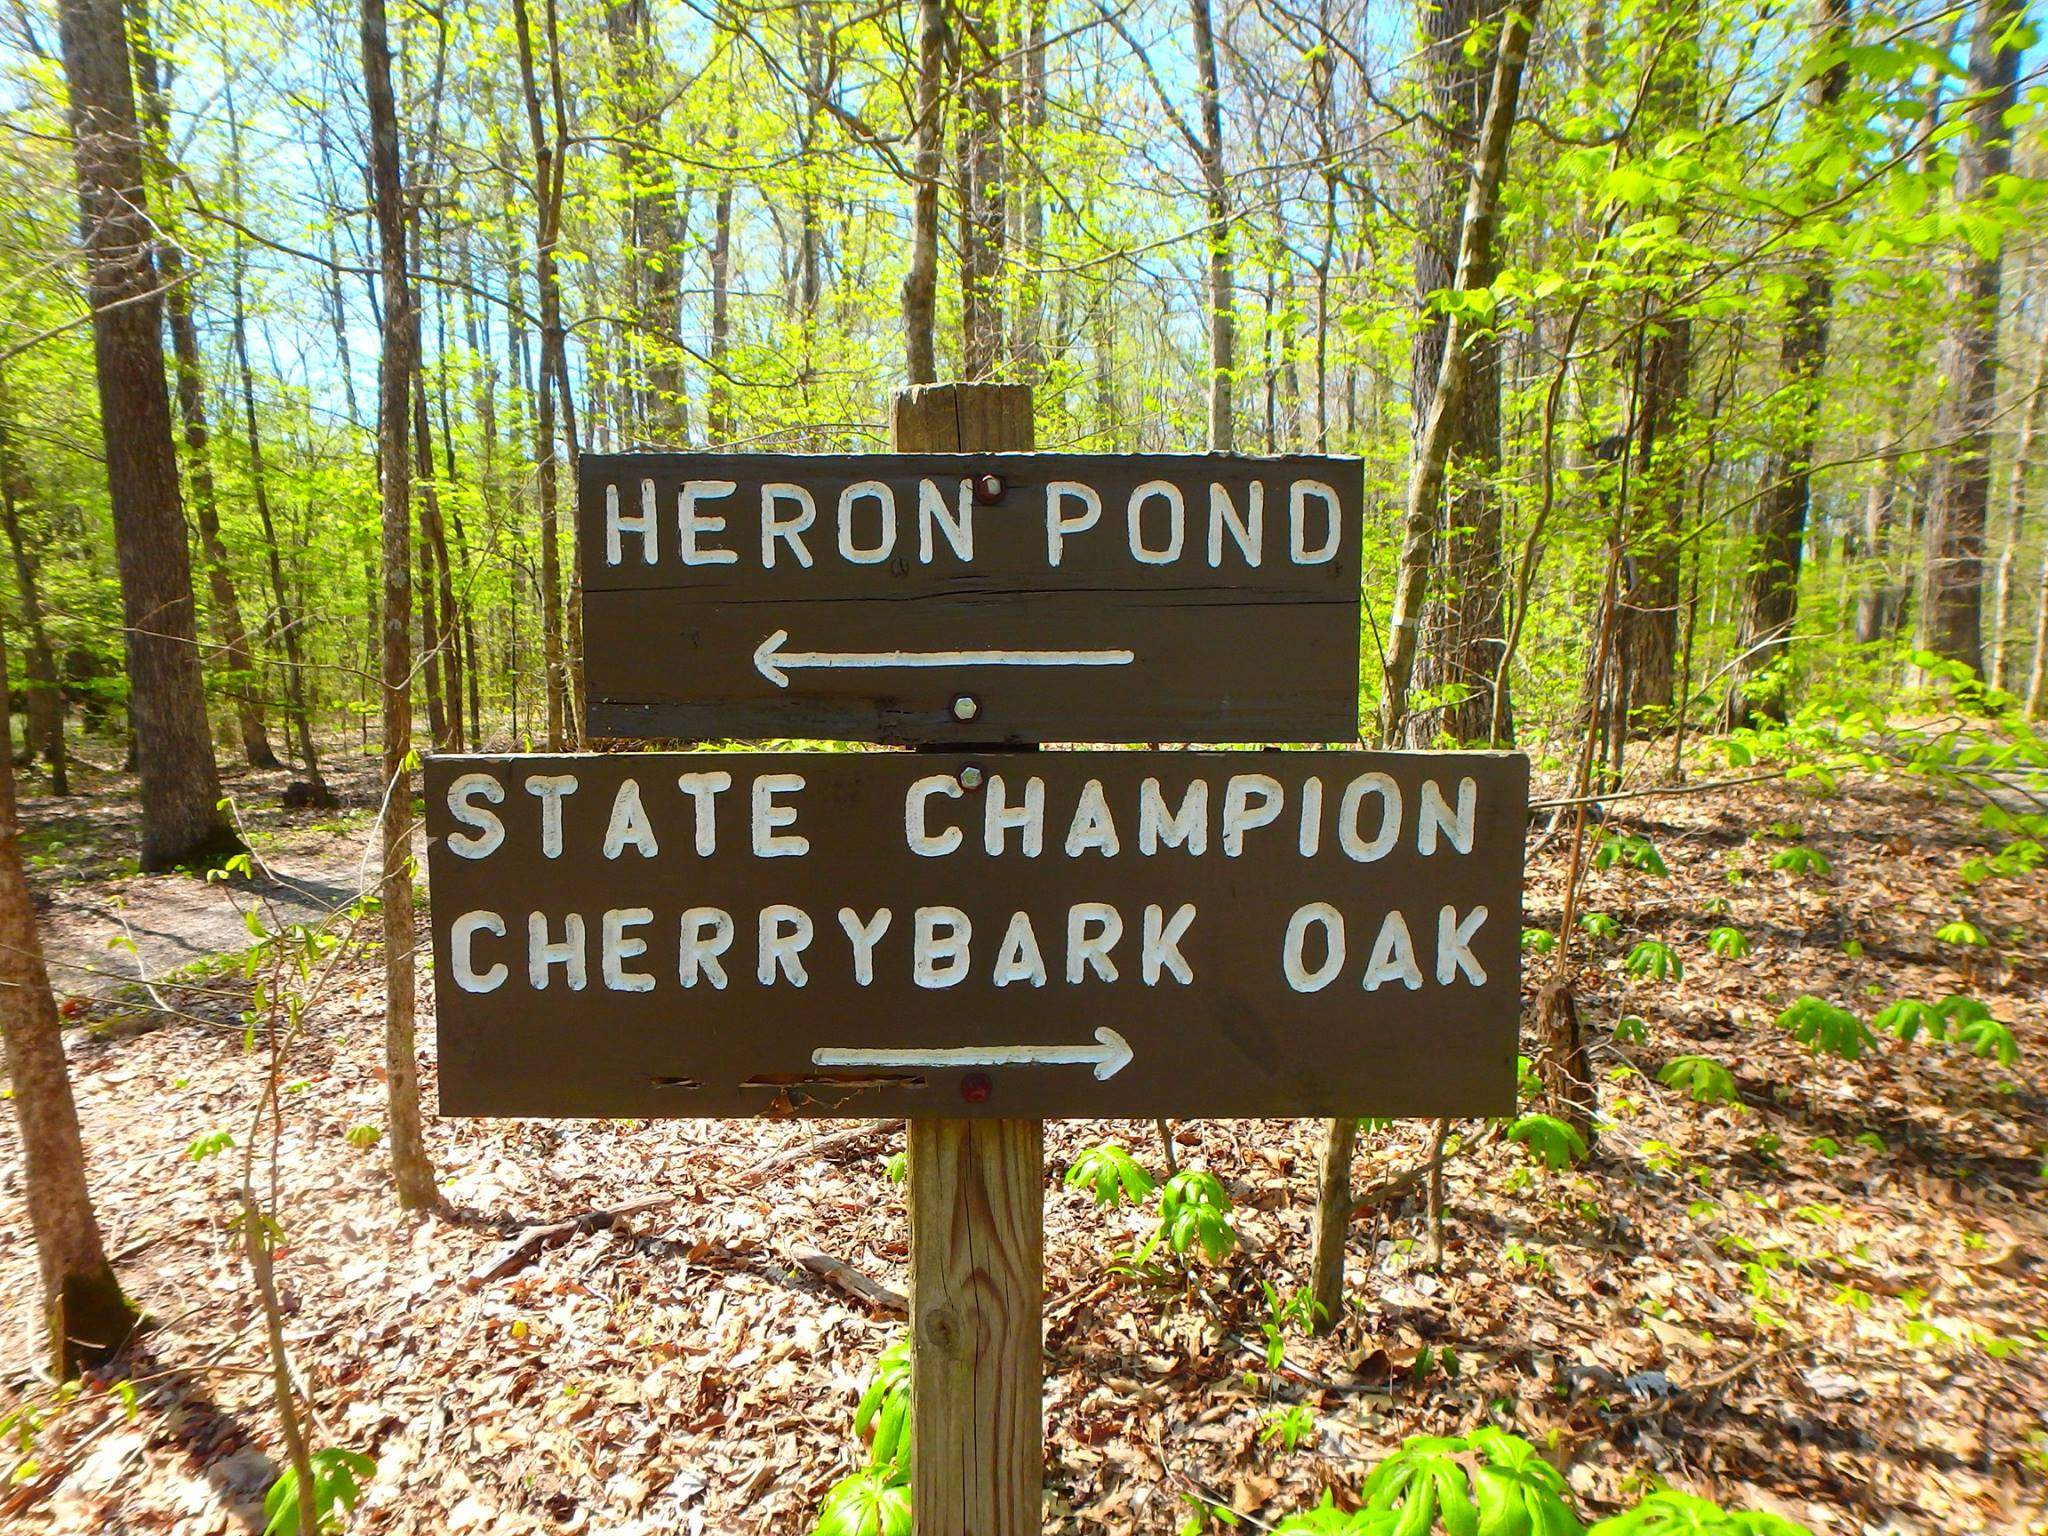 A directional sign in the woods. One way points to Heron Pond, the other to State Champion Cherrybark Oak